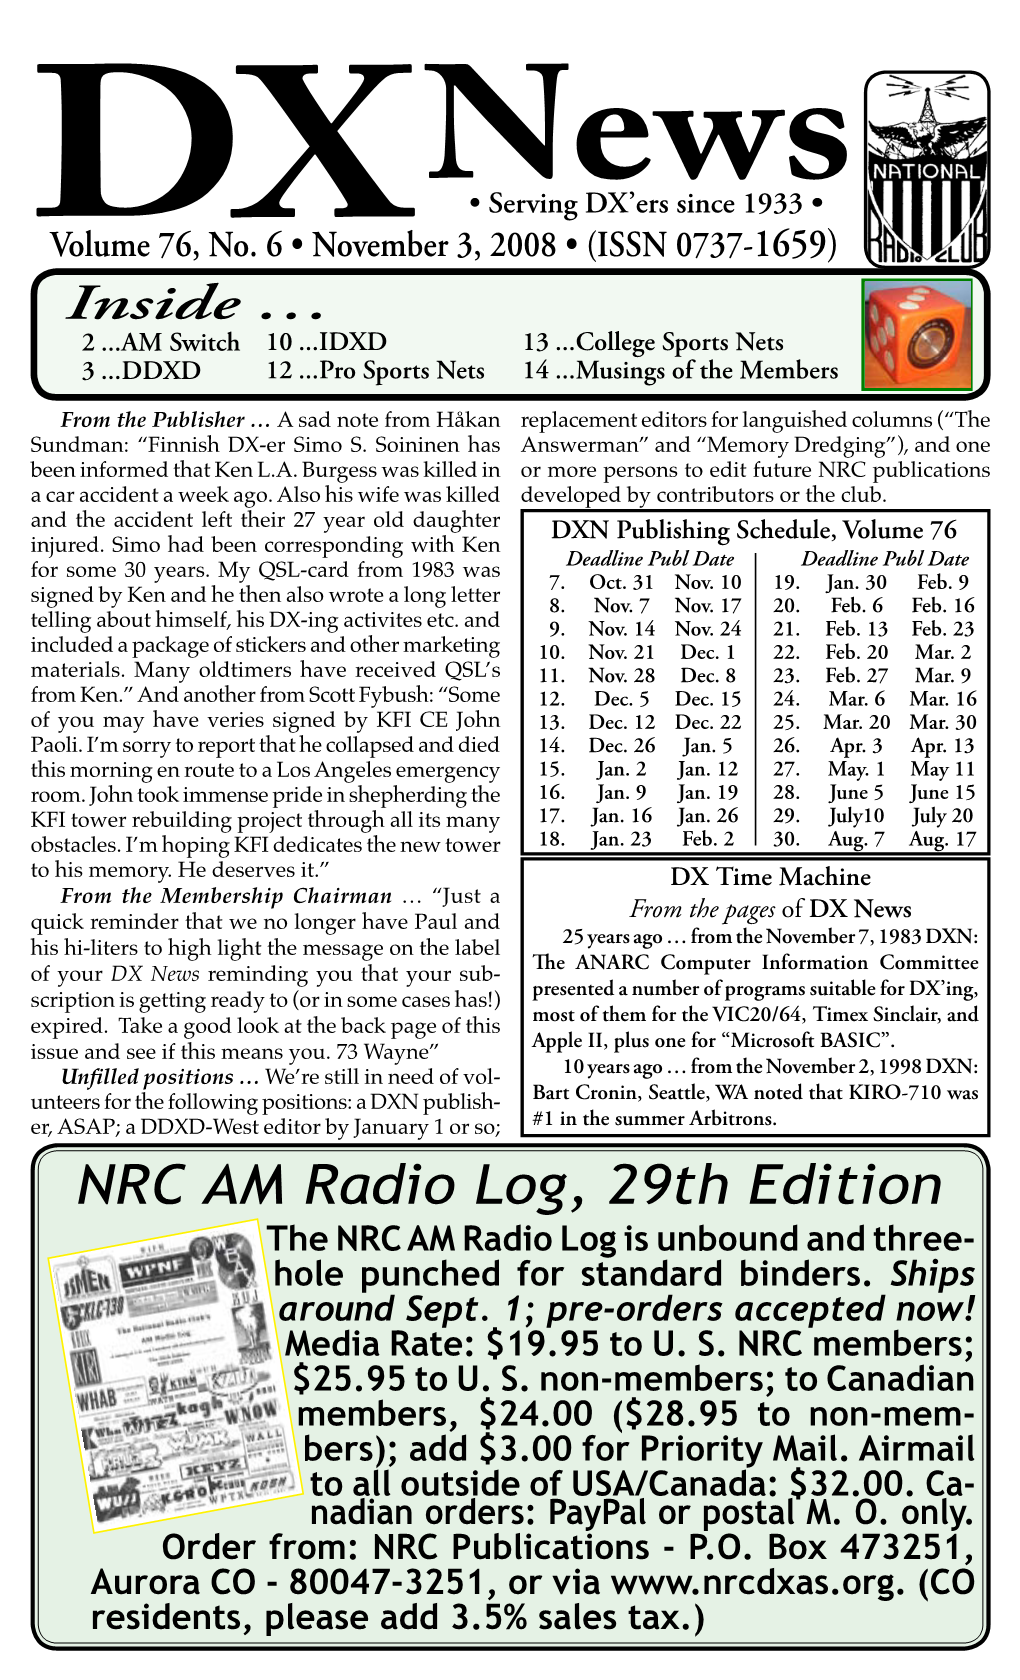 NRC AM Radio Log, 29Th Edition the NRC AM Radio Log Is Unbound and Three- Hole Punched for Standard Binders